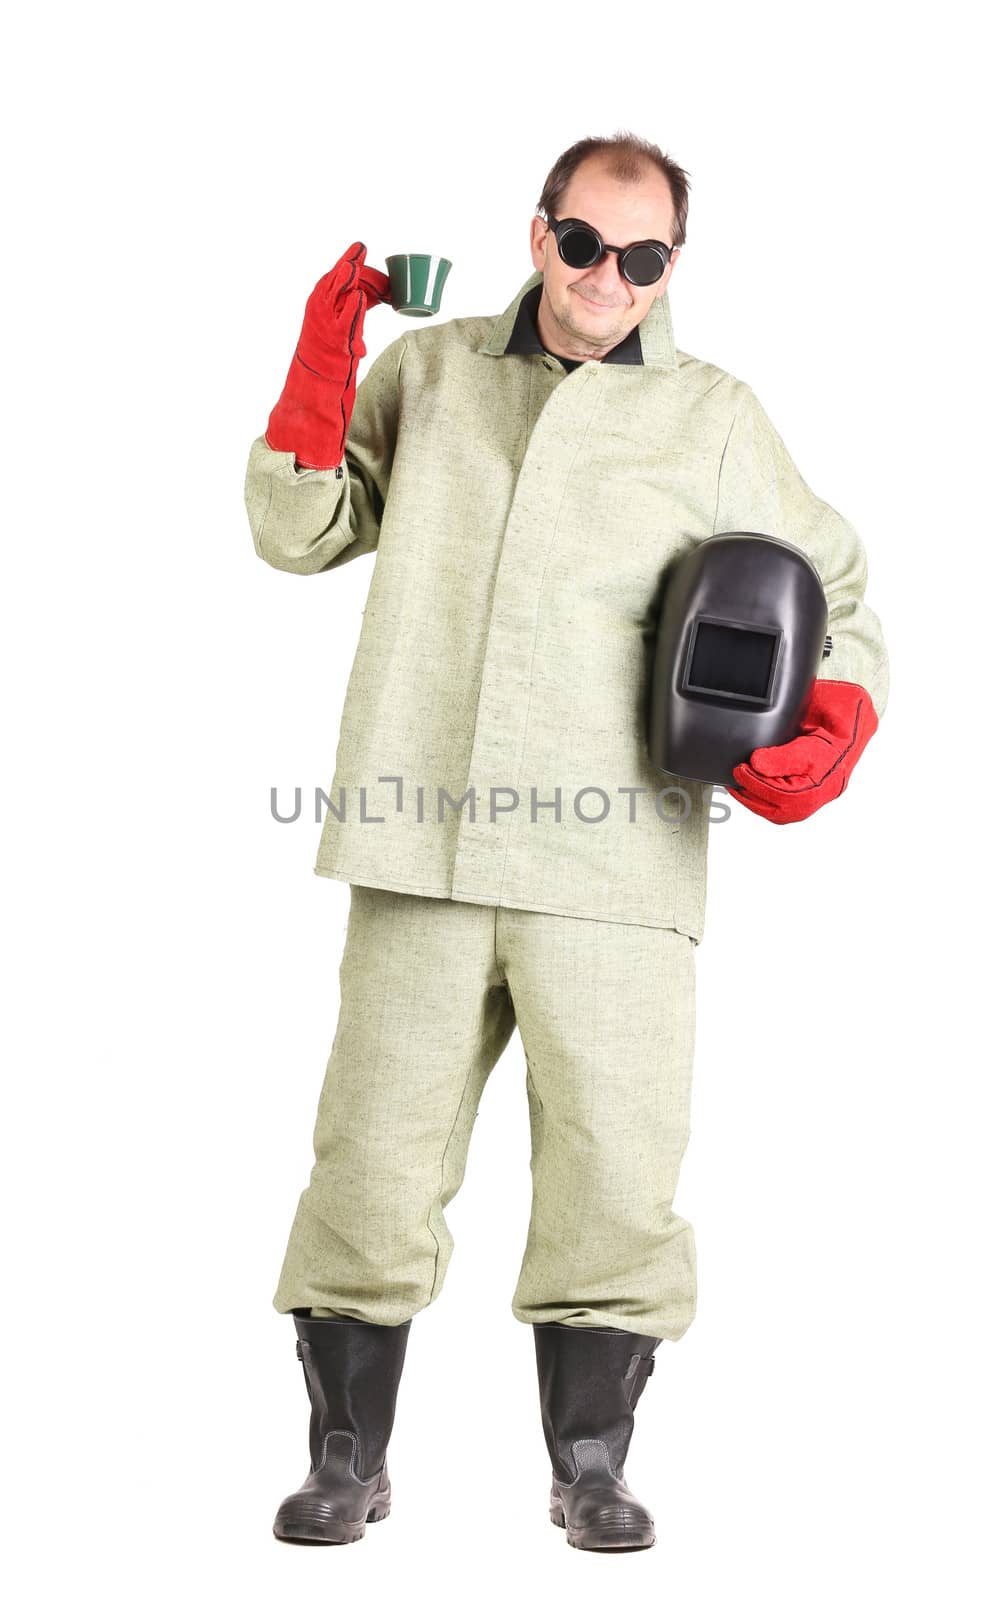 Welder with mask and coffee. Isolated on a white background.